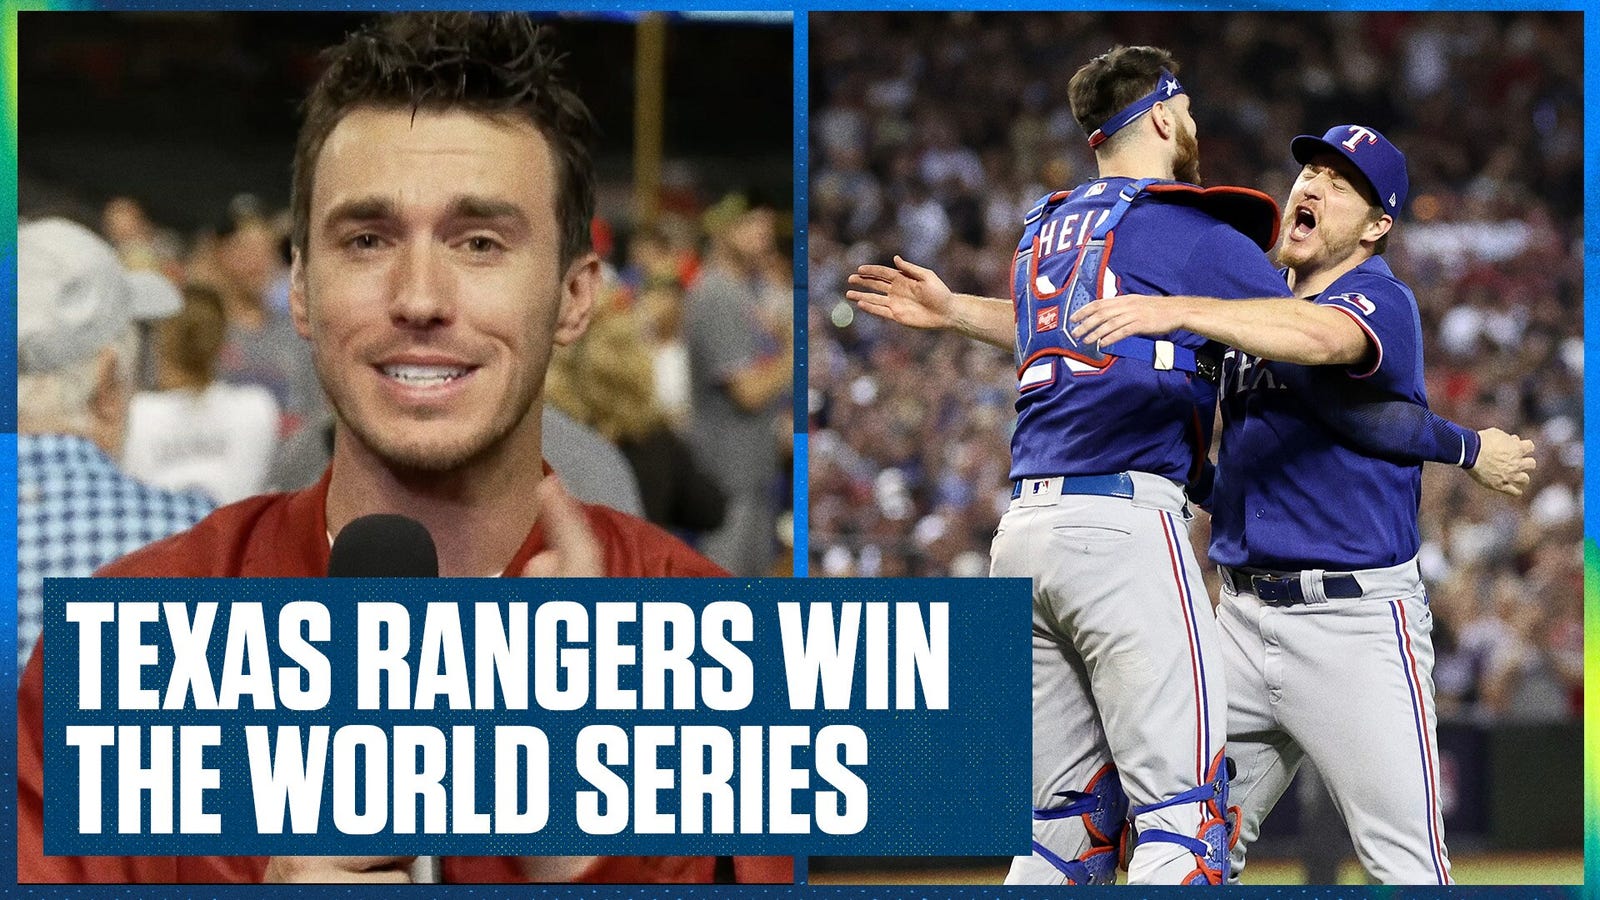 Rangers are World Series champs for the first time in franchise history